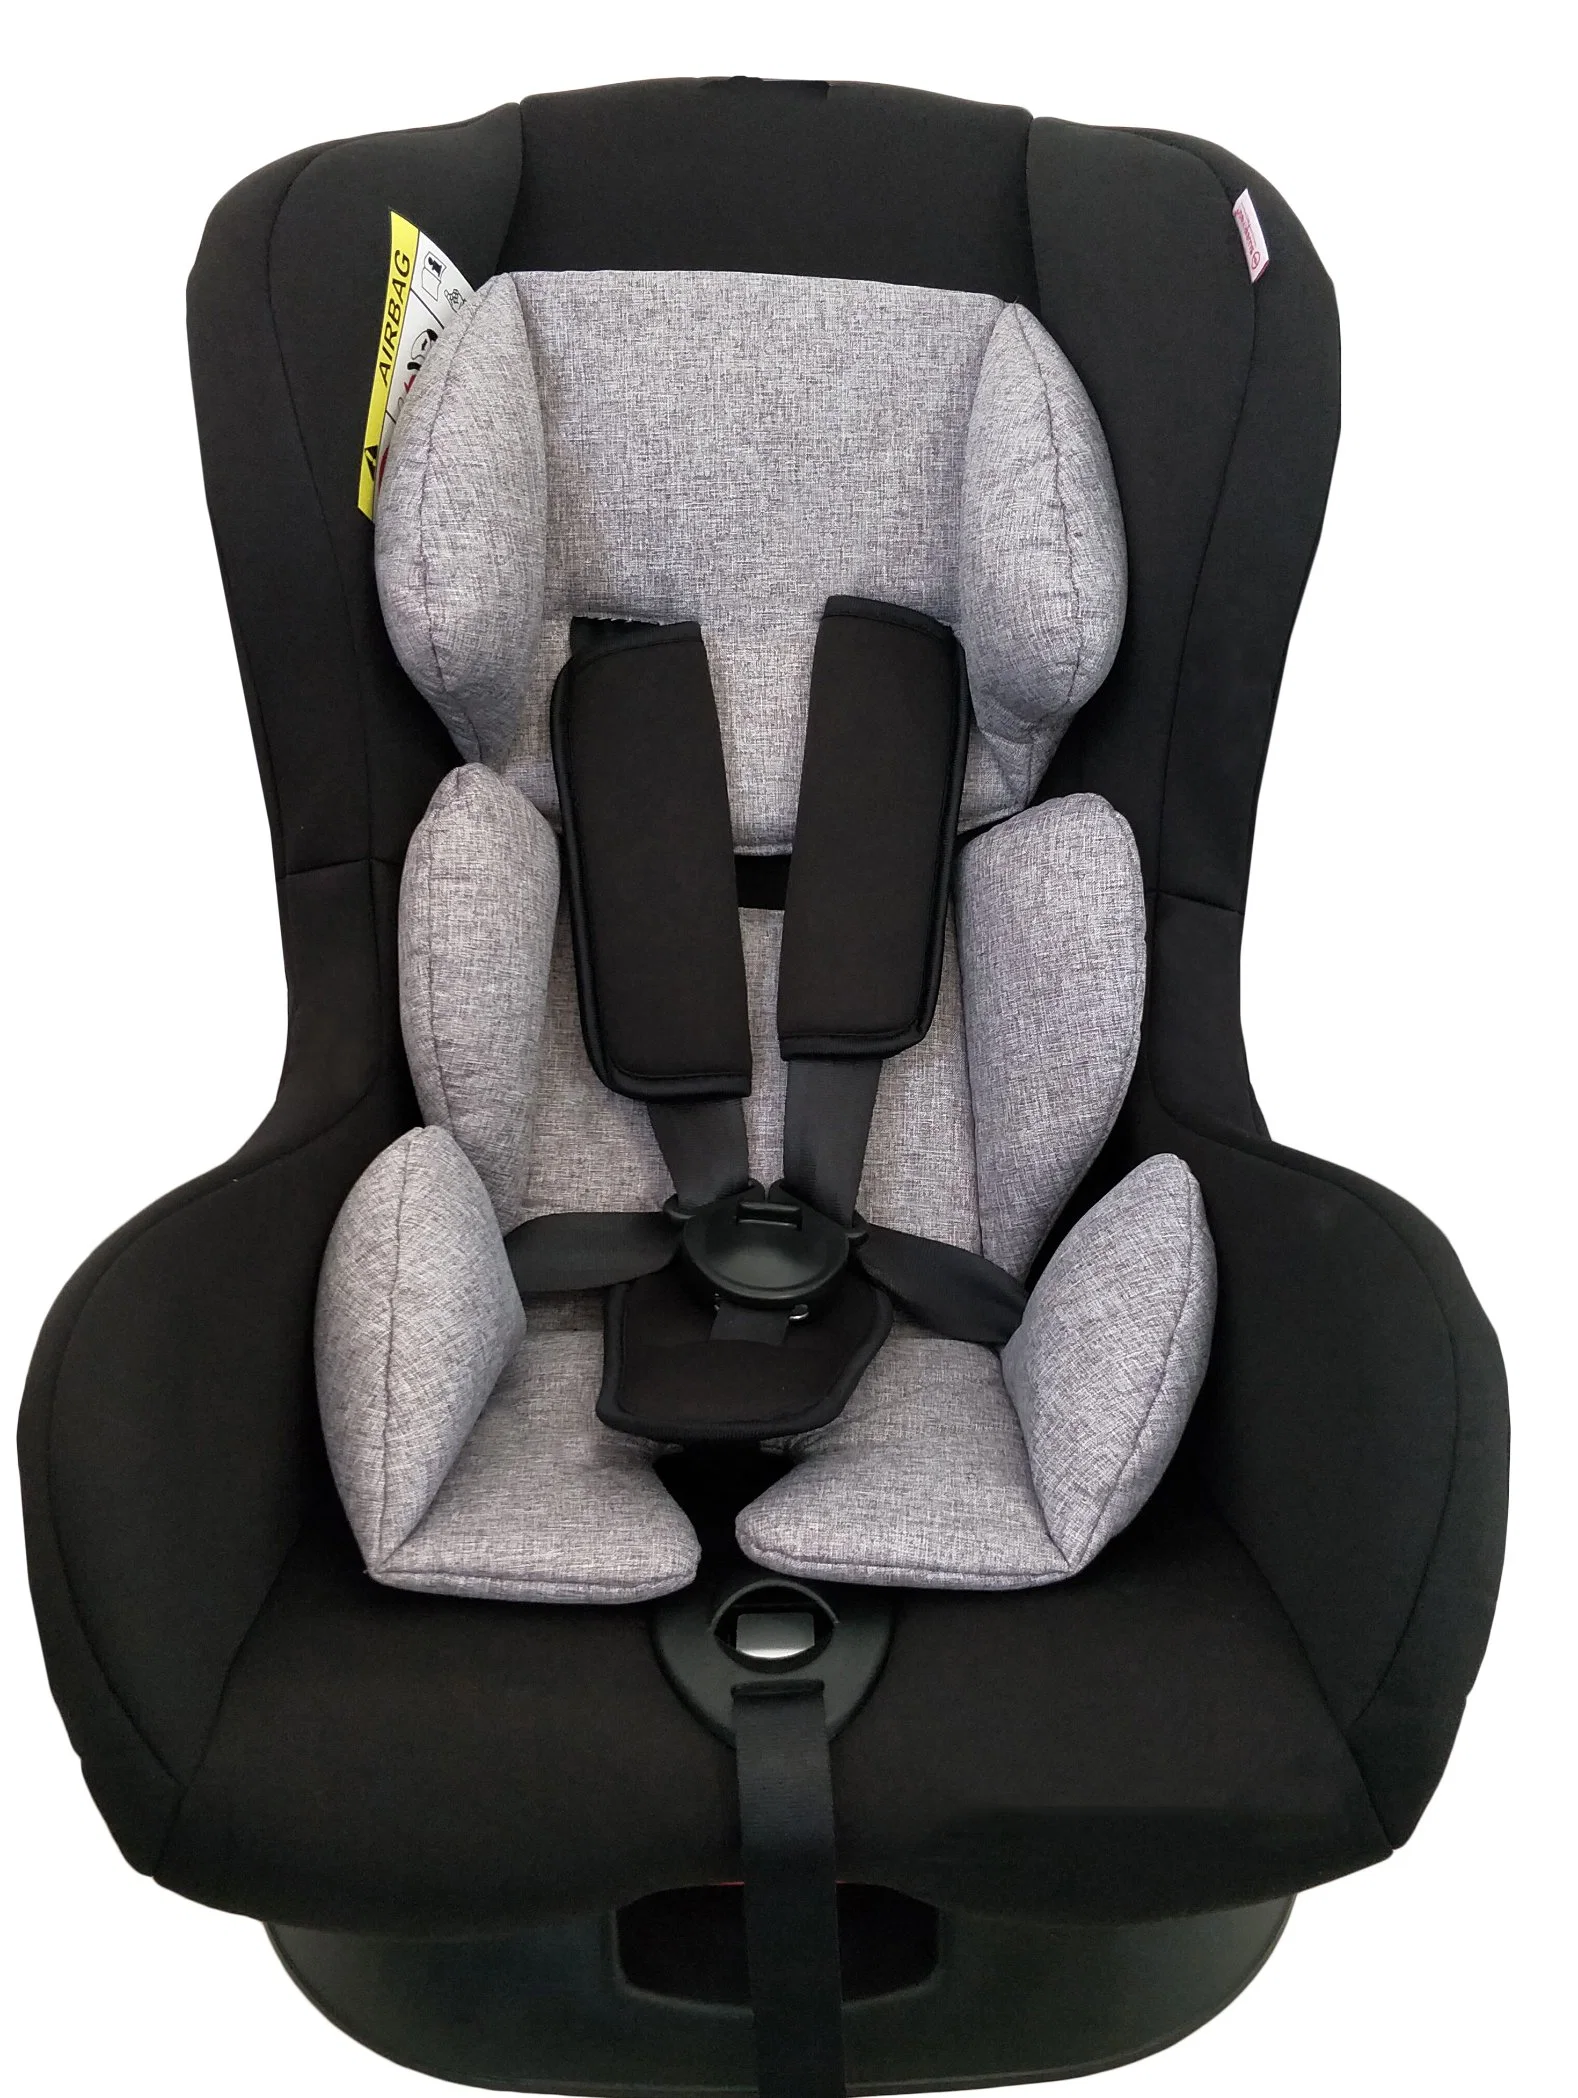 New Baby Kids Children Car Seat with Certificate ECE R44/04